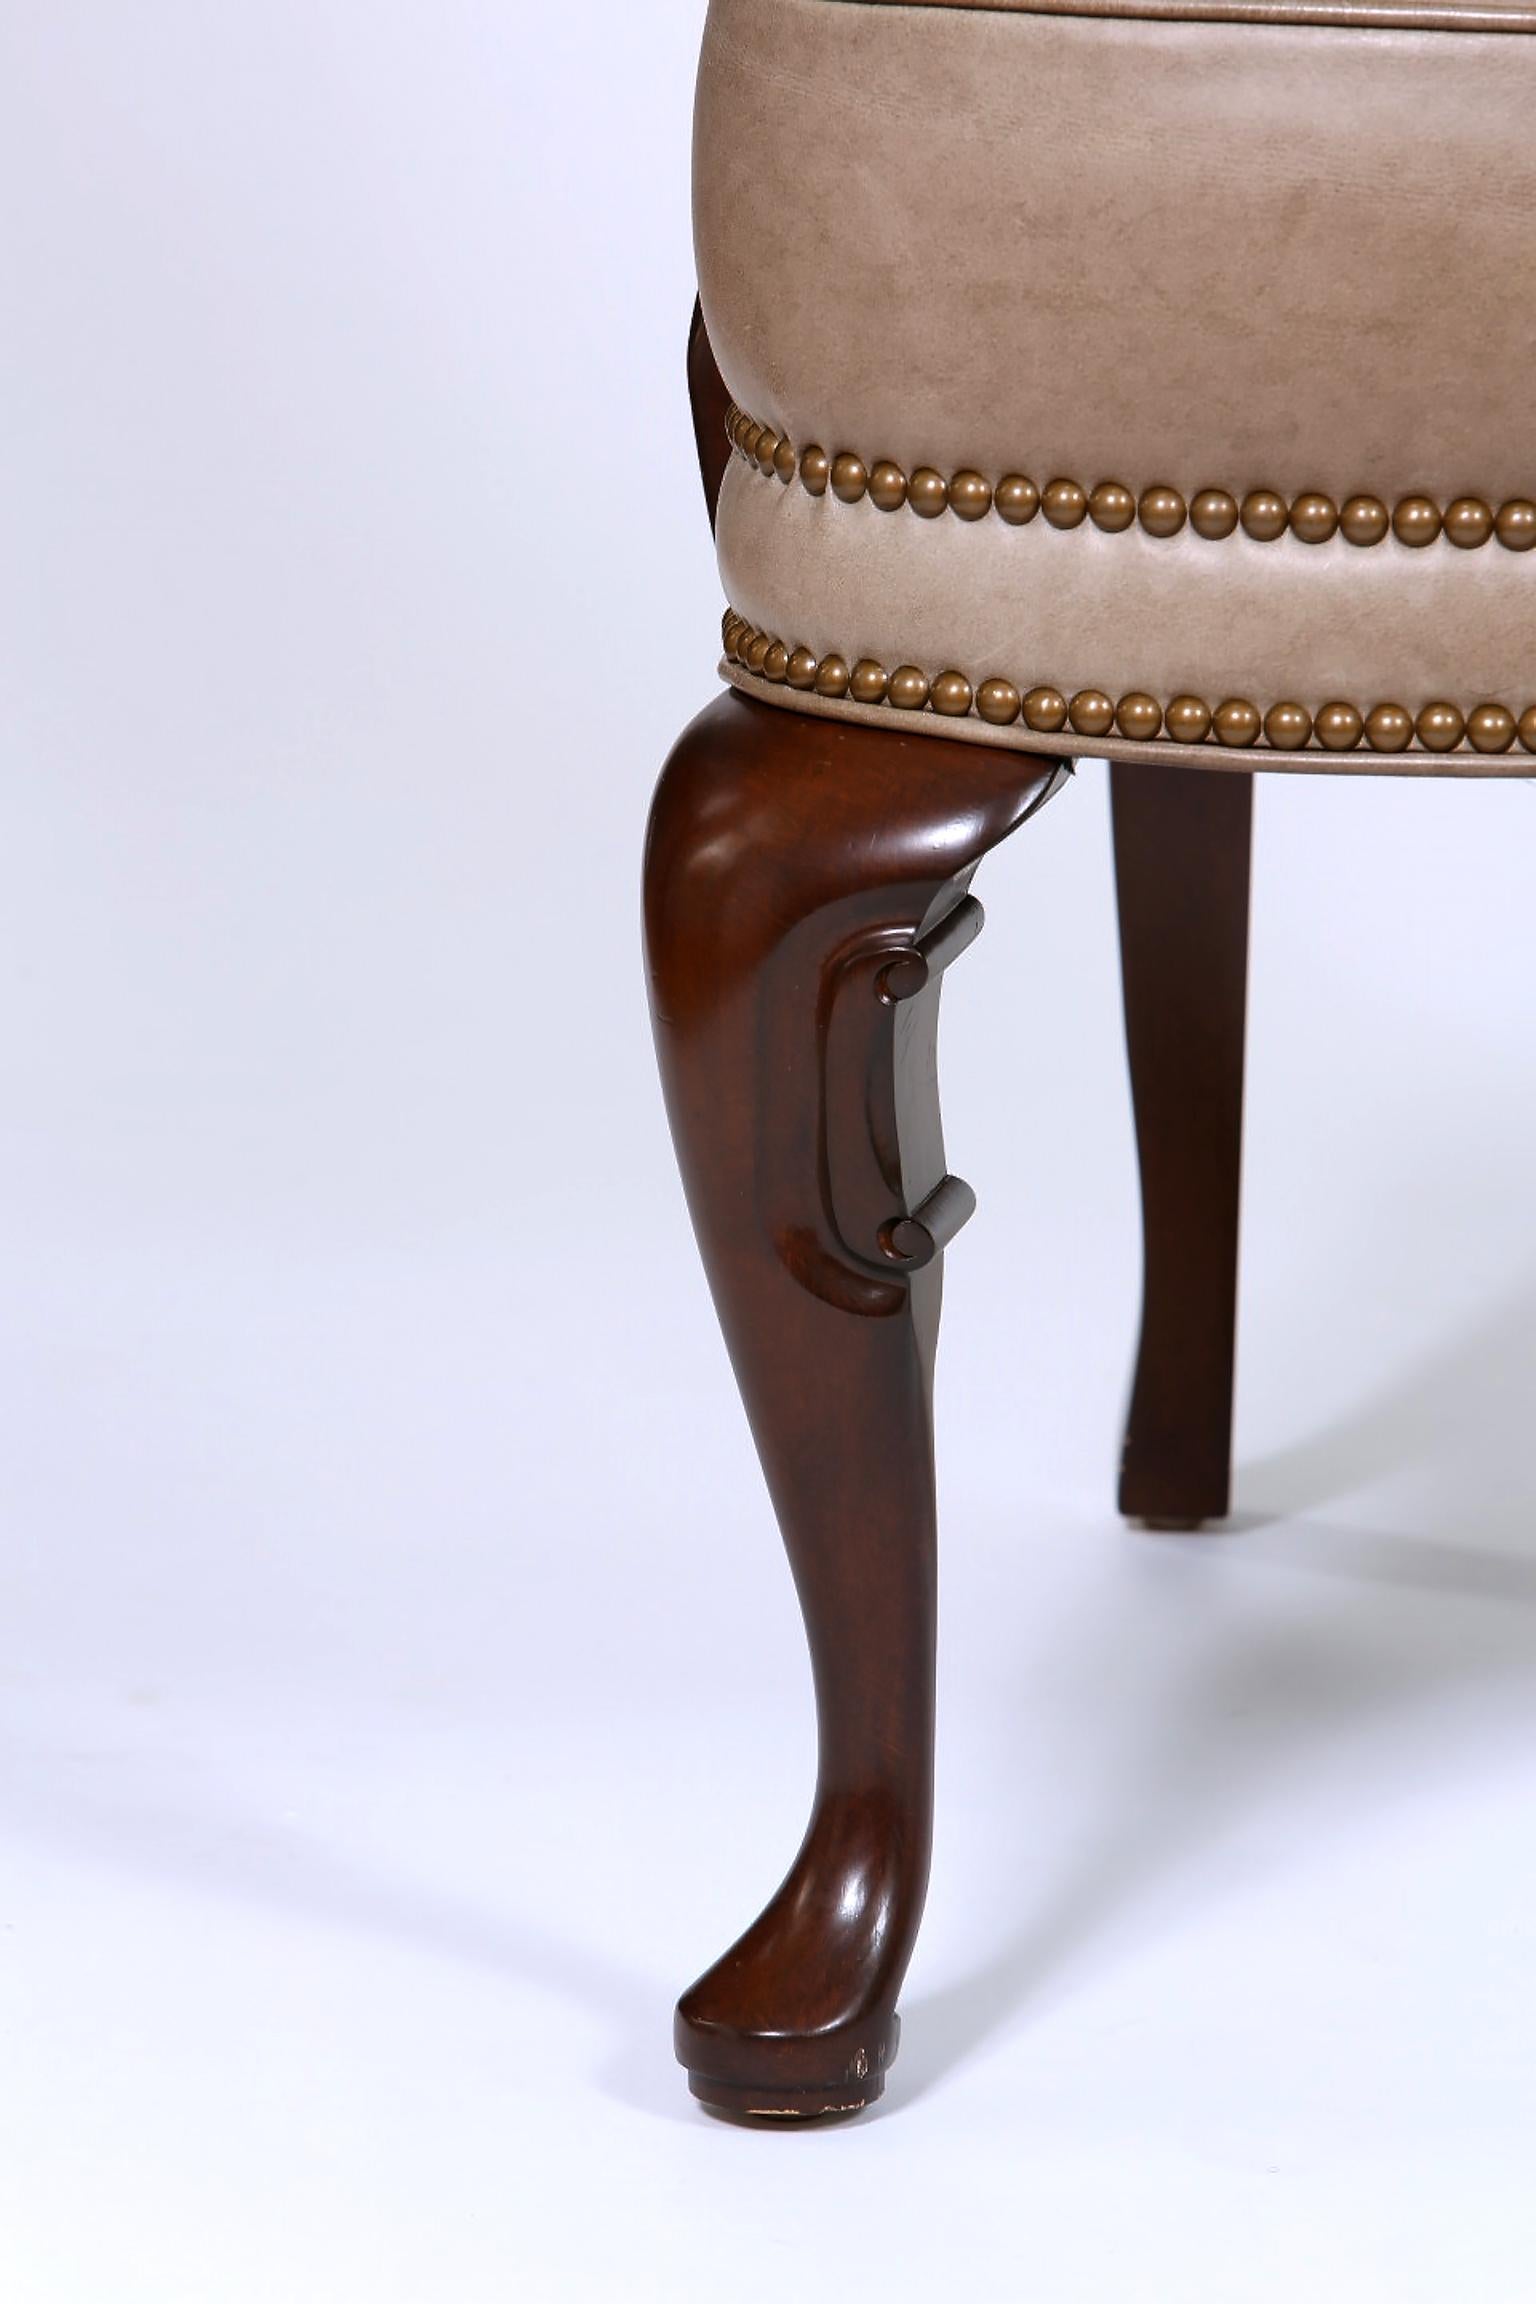 queen anne chair leather